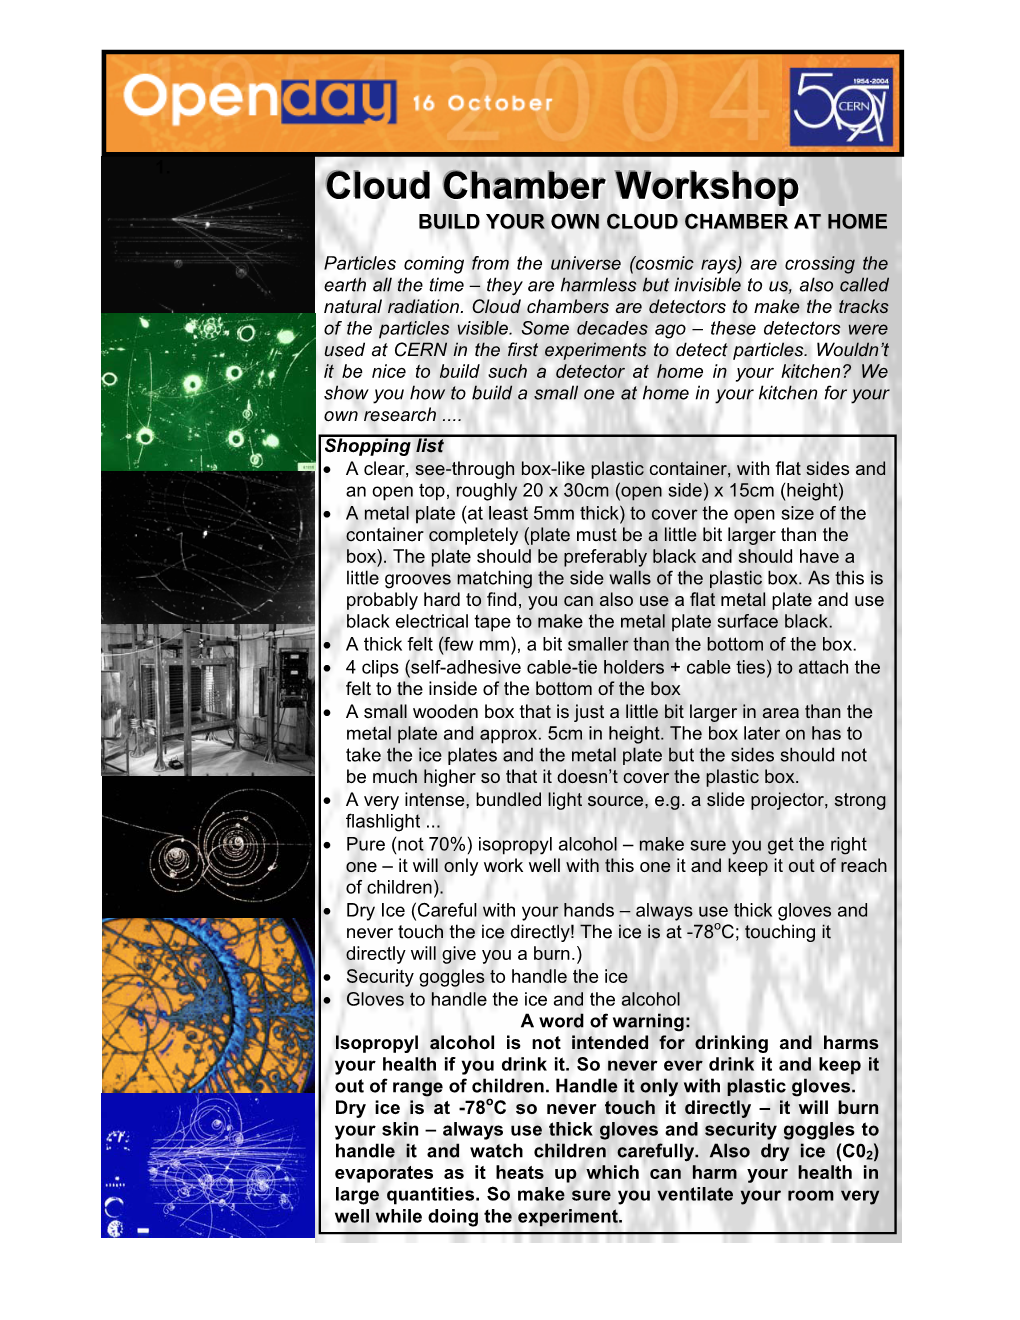 Cloud Chamber Workshop Developed By: D